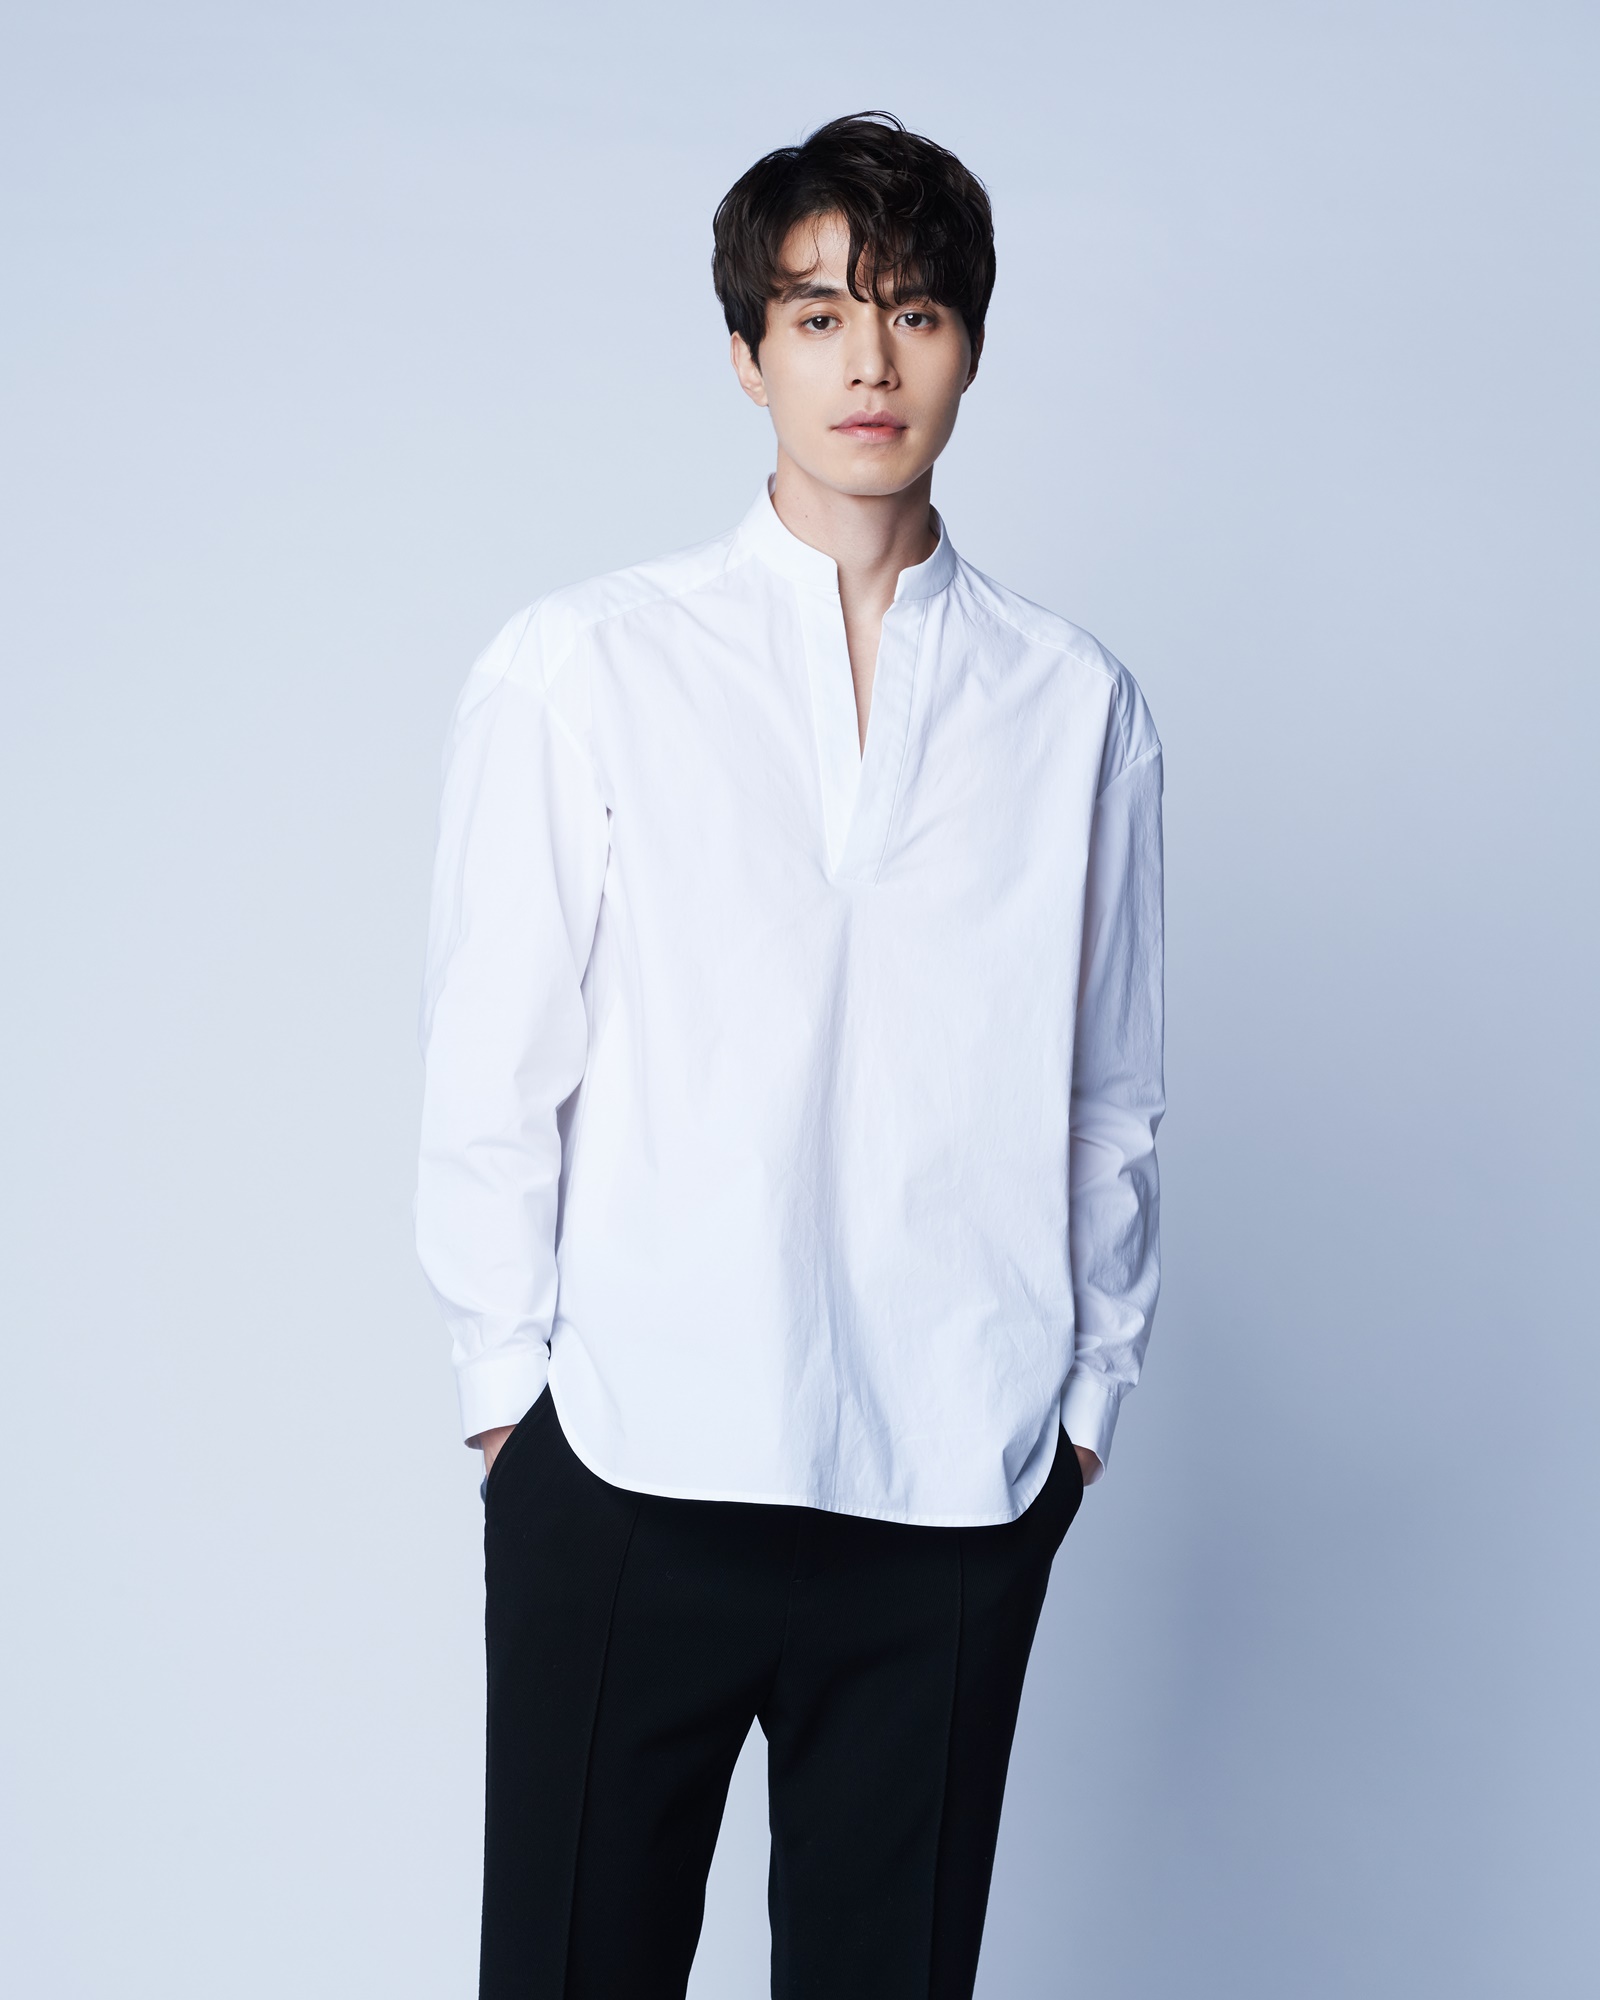 lee dong wook 2022